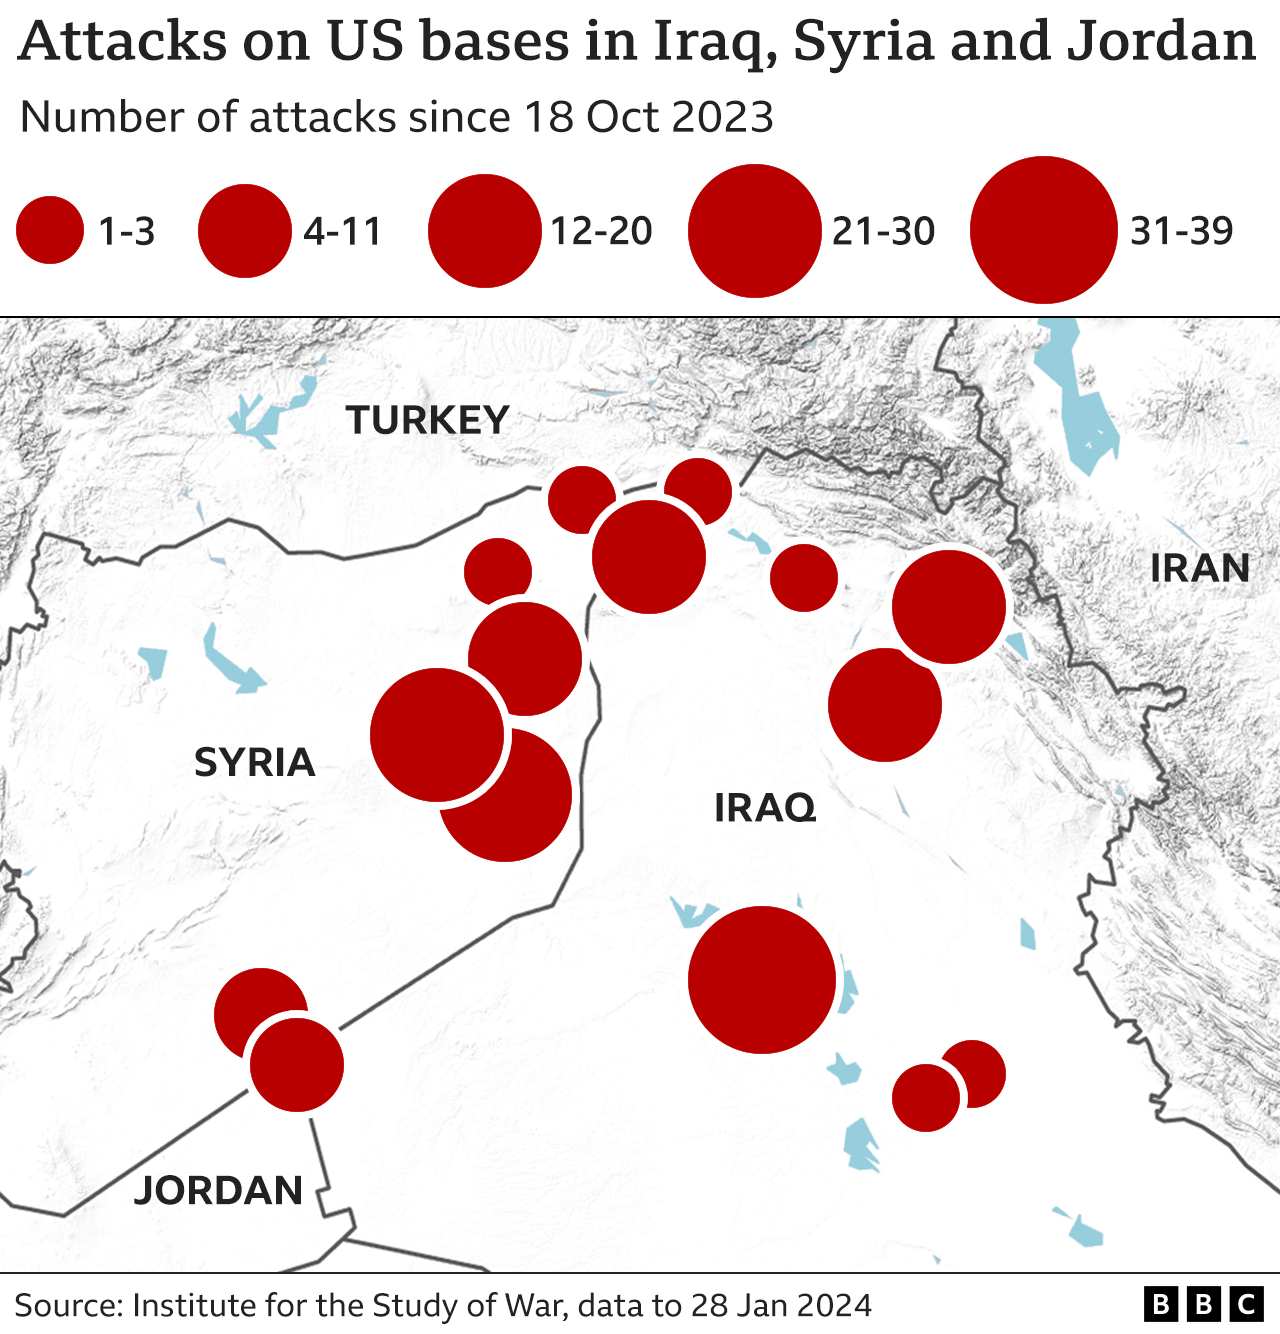 Tracked attacks on US bases in the Middle East between 18 October 2023 and 28 January 2024